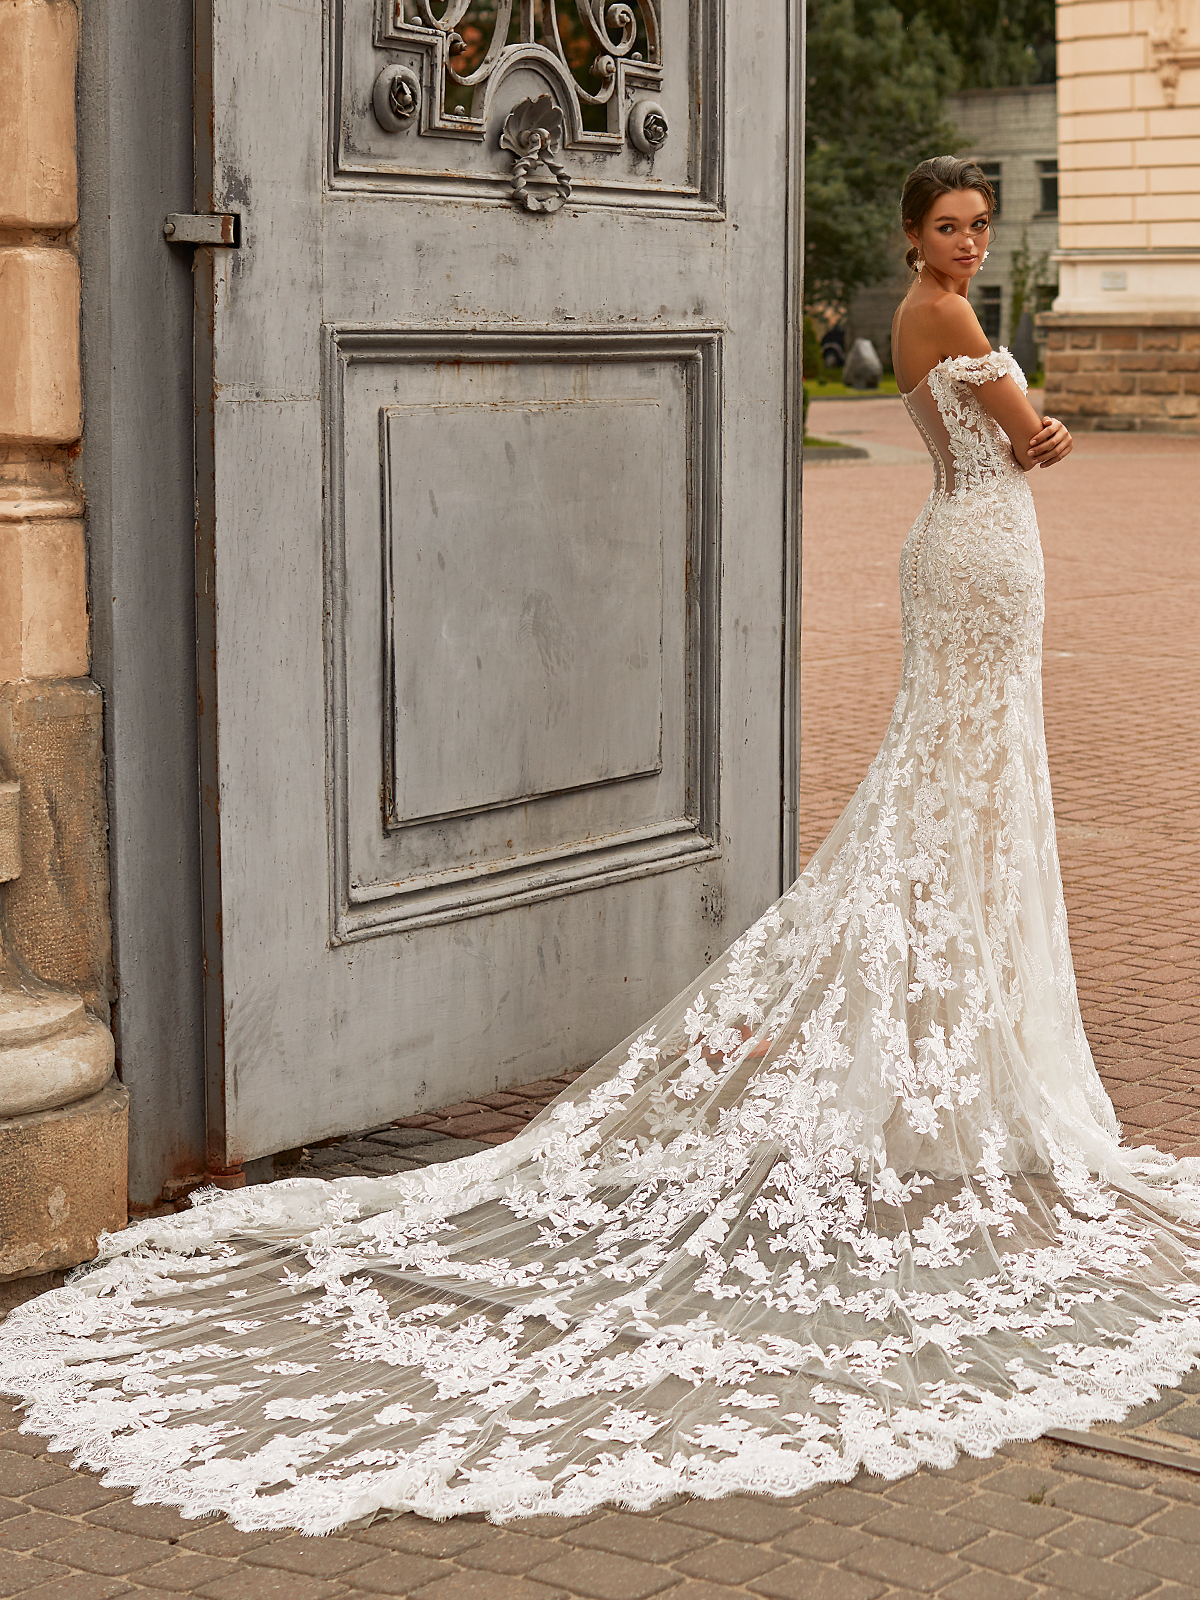 Top tips to transform your wedding dress into an evening gown – no